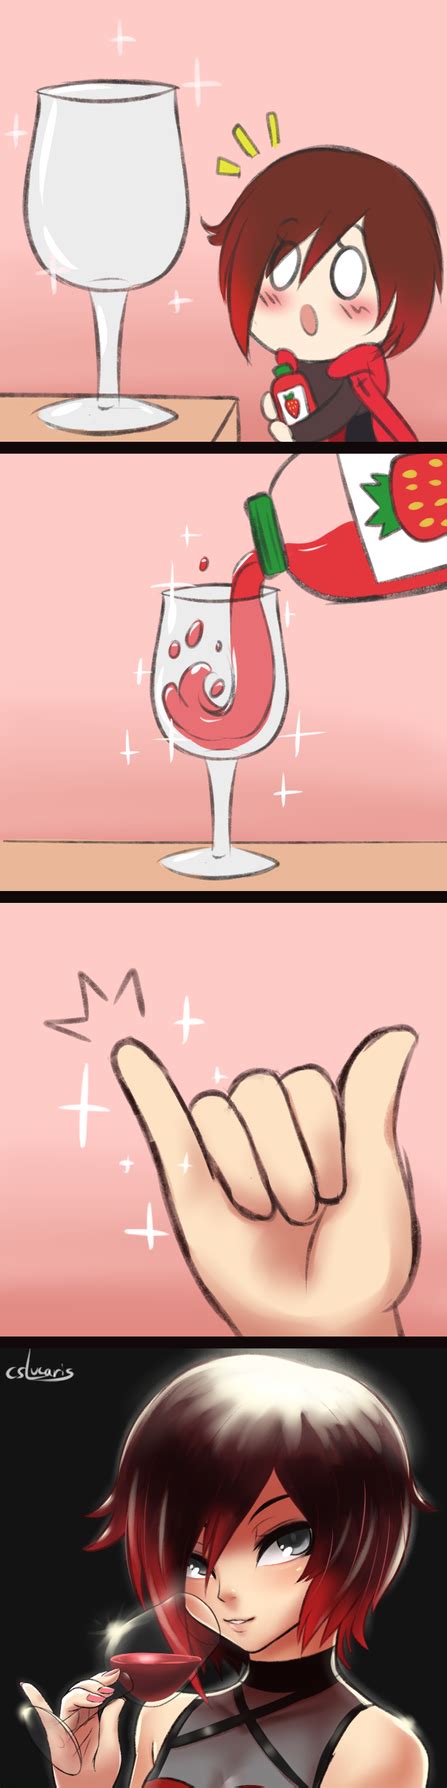 How It Feels To Drink From A Wine Glass By Cslucaris On Deviantart